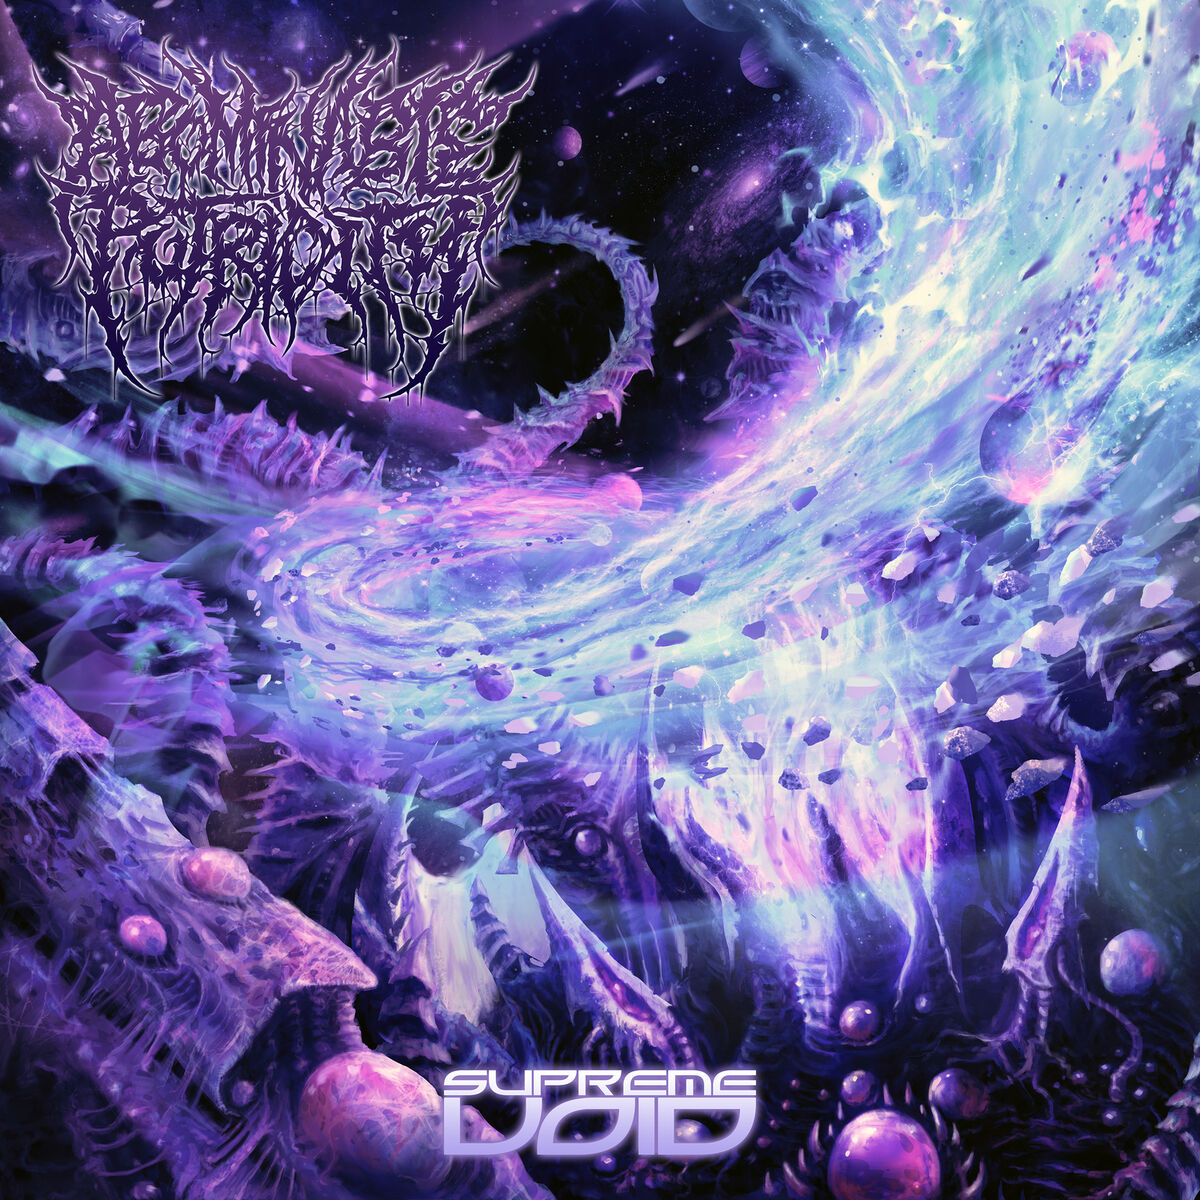 Abominable Putridity: albums, songs, playlists | Listen on Deezer